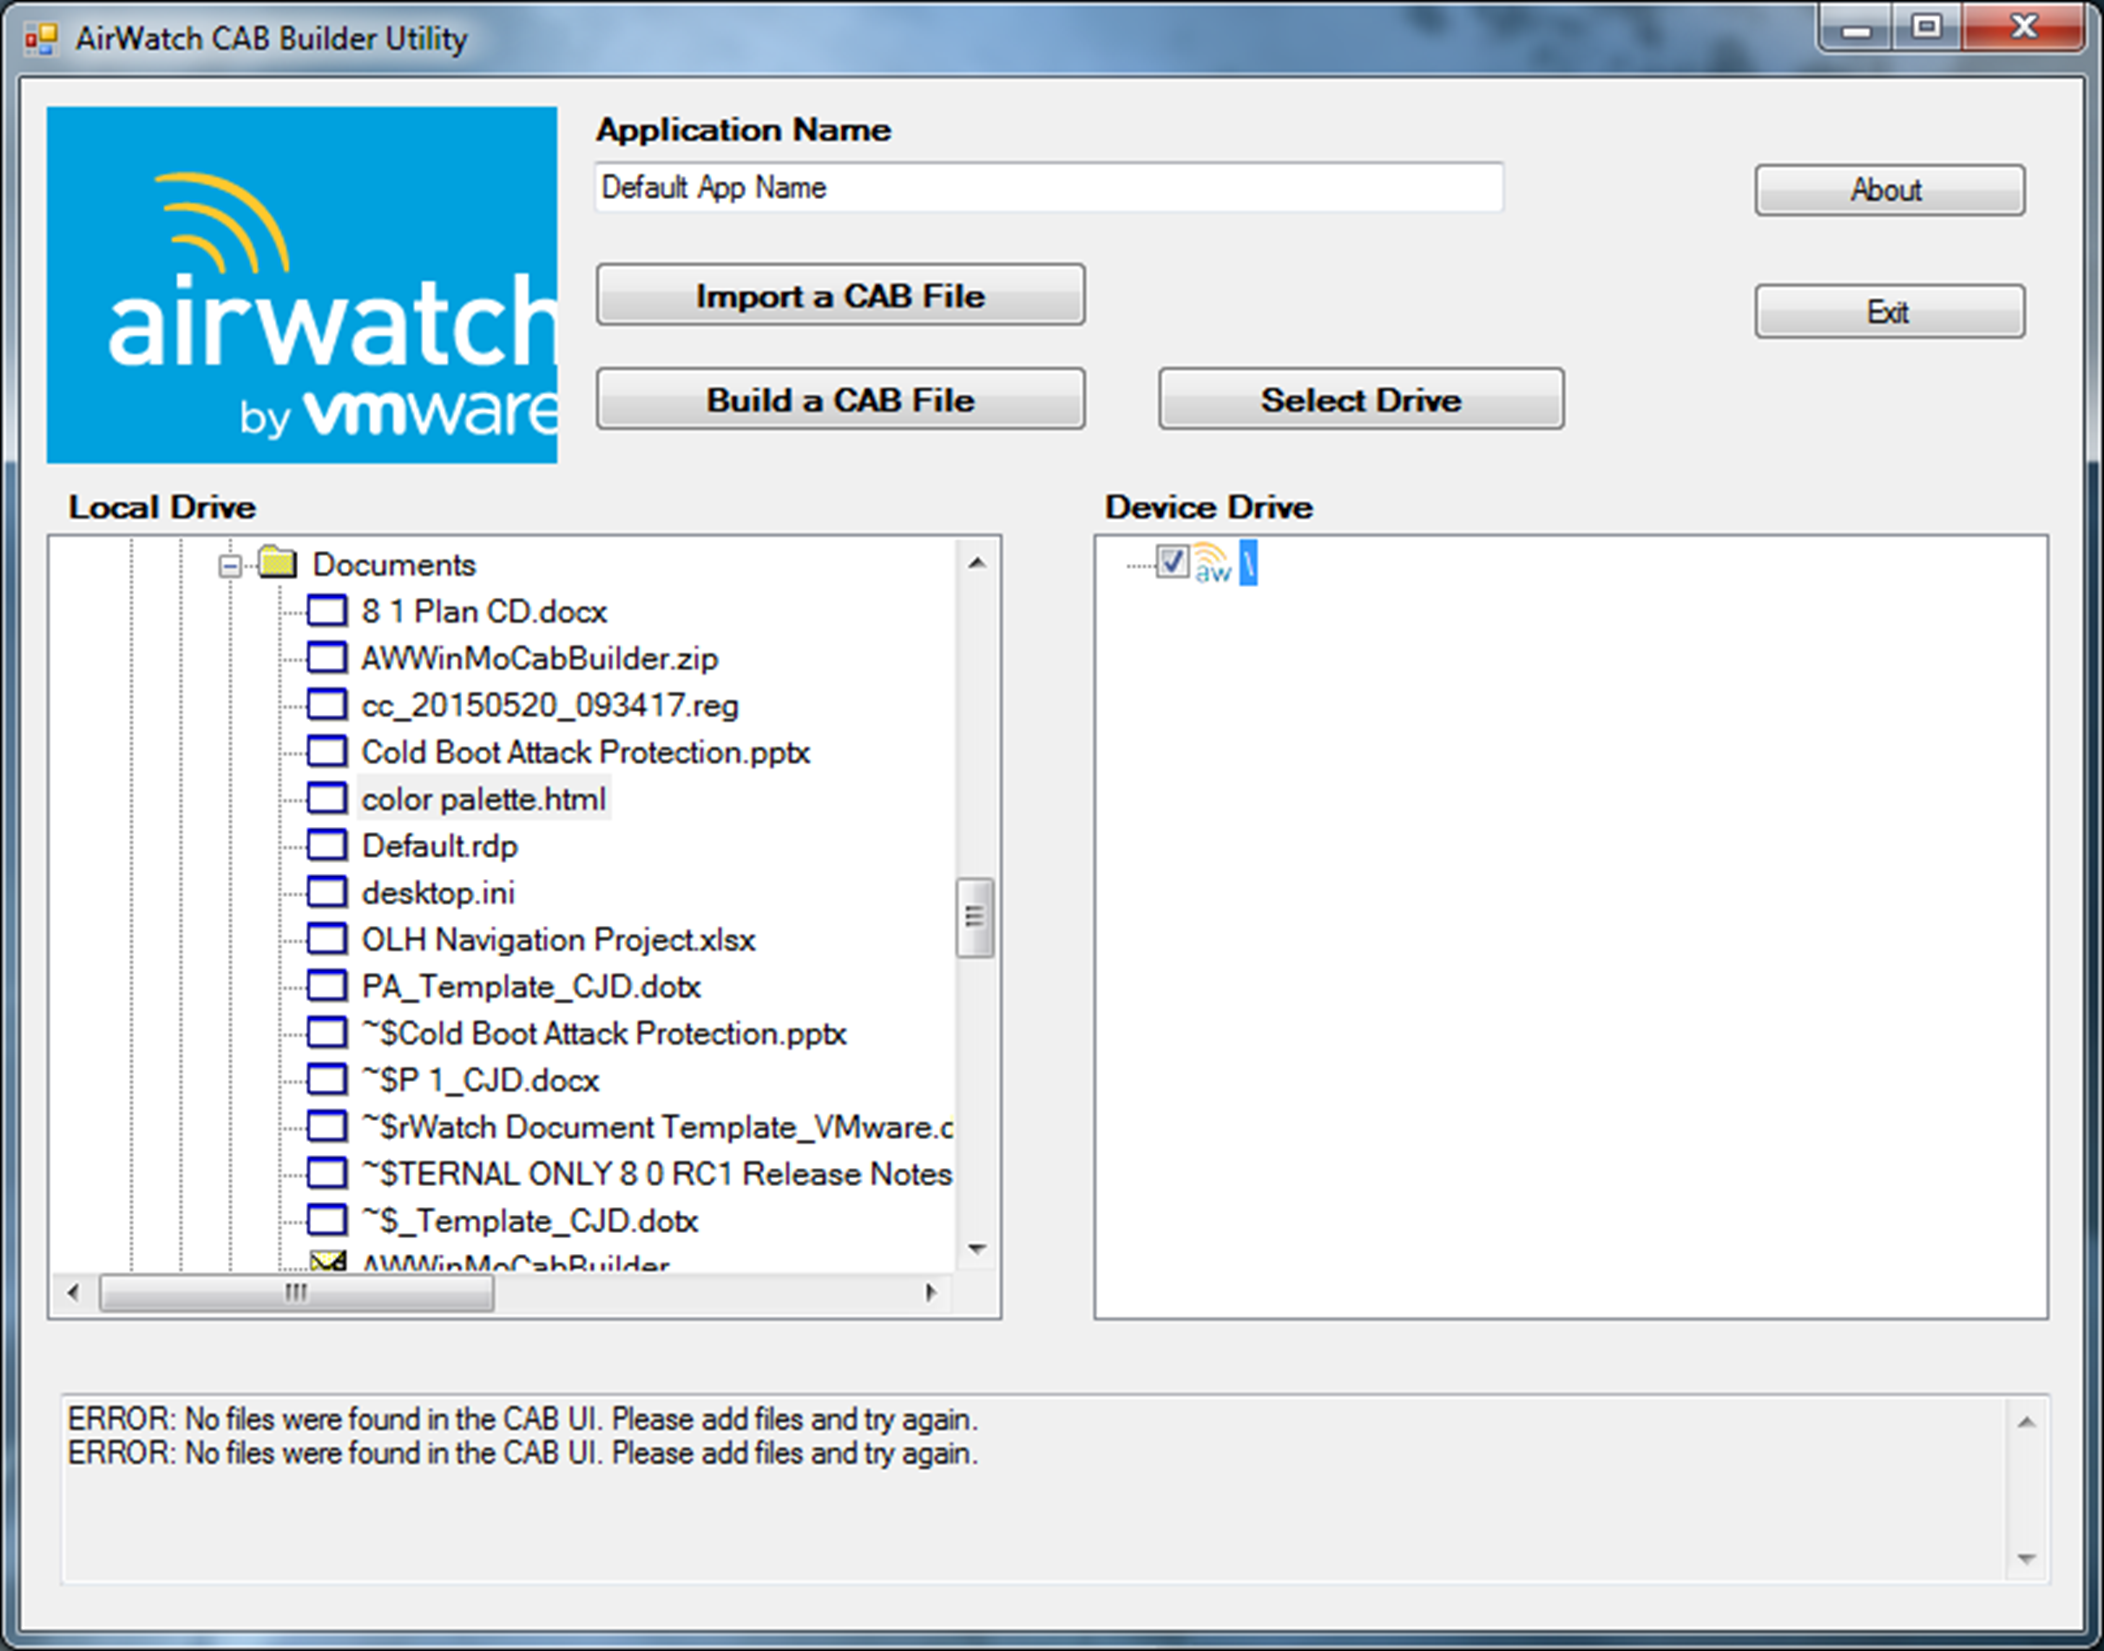 This screenshot shows the AirWatch CAB Creator Utility screen after you begin navigating your local drive in search of content to add to the CAB.